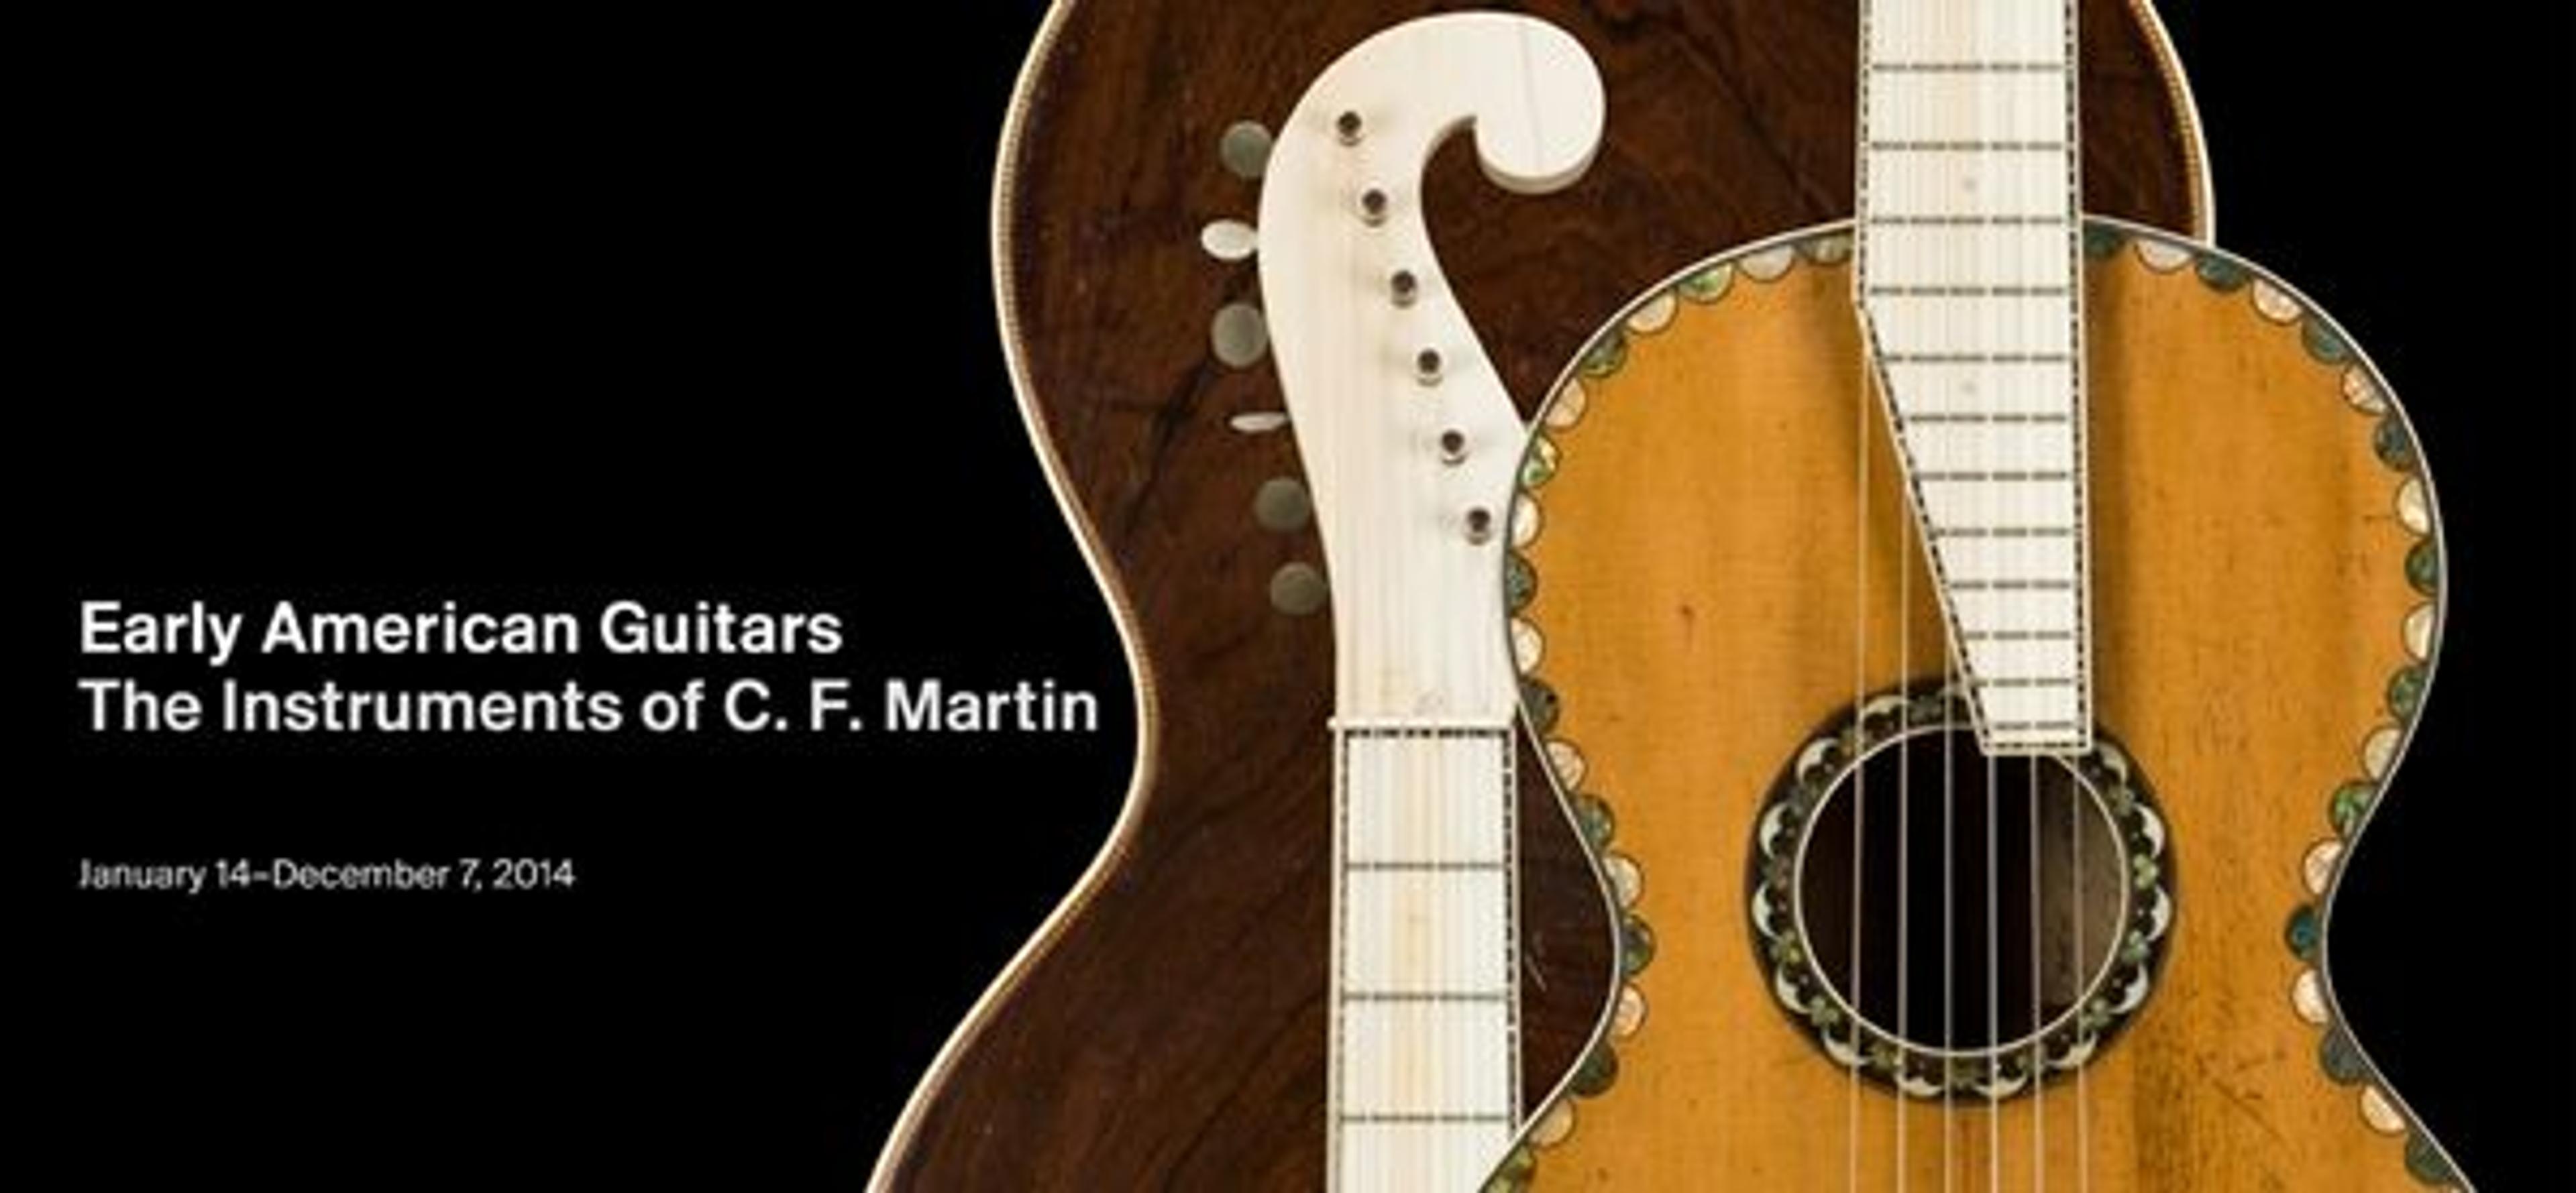 Early American Guitars: The Instruments of C. F. Martin